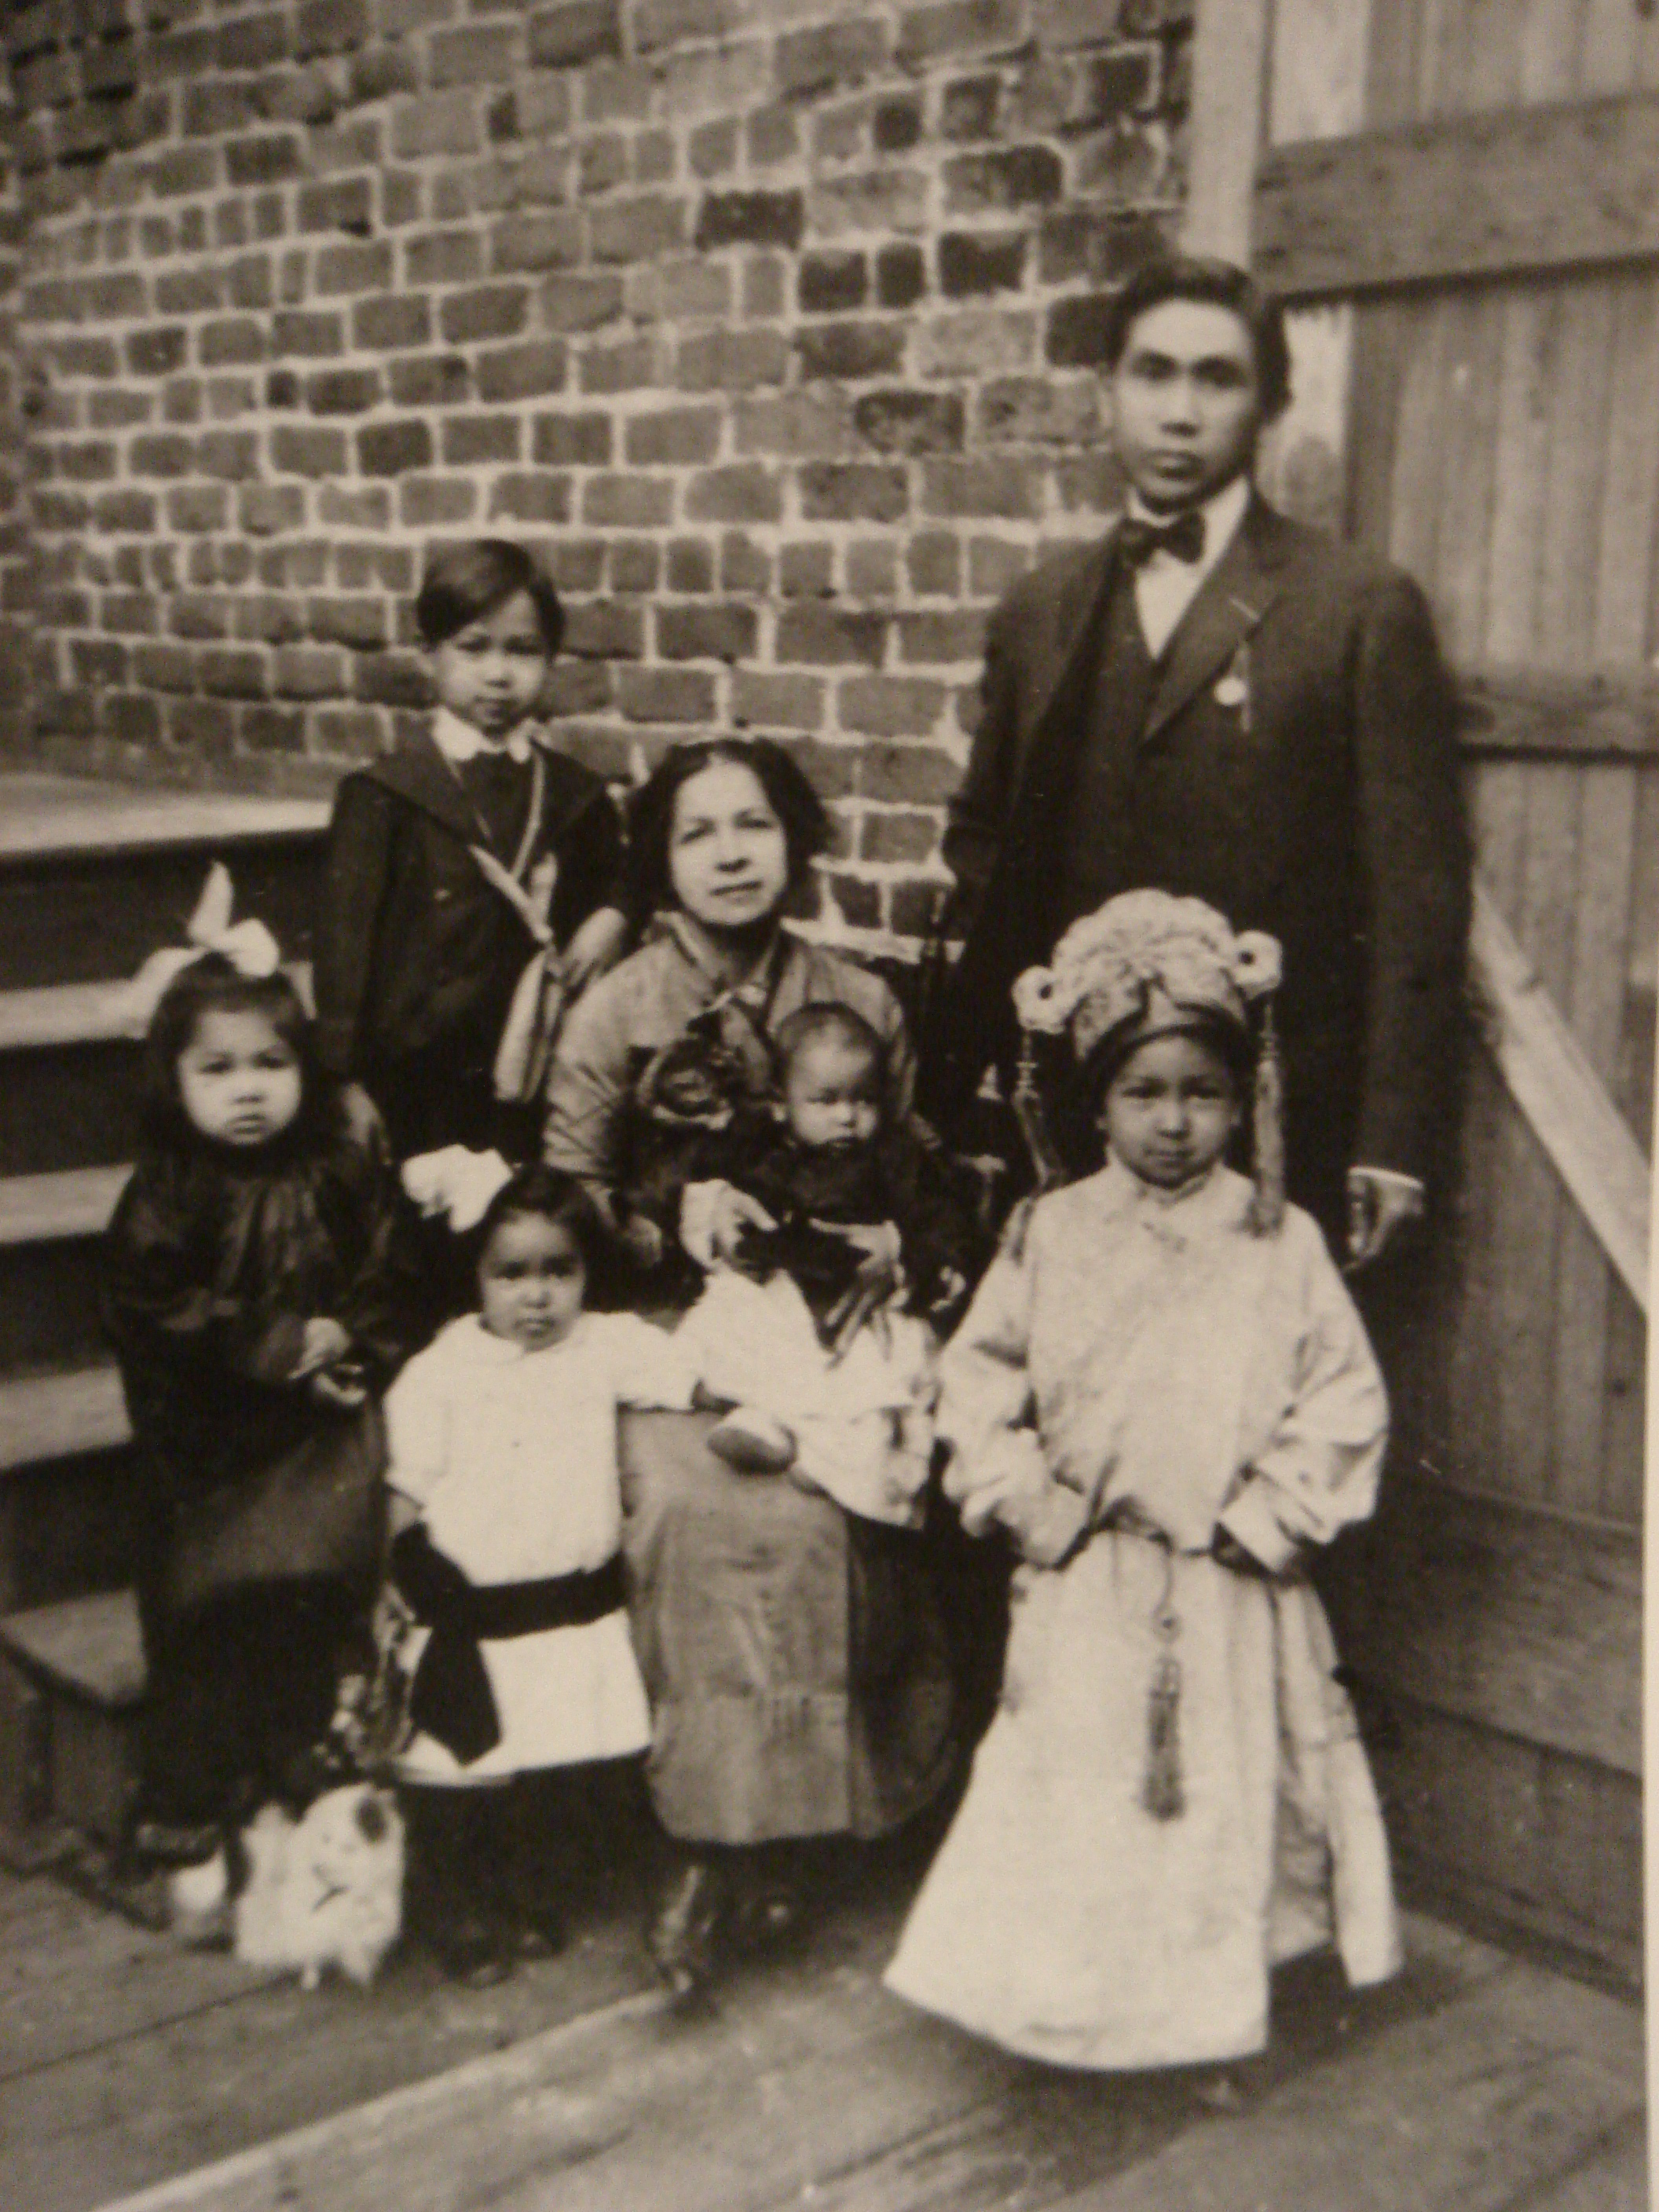 Chinese New Year, 1914, by the steps behind the laundry. Papa sent portraits of his growing family to our grandparents in Guangdong.